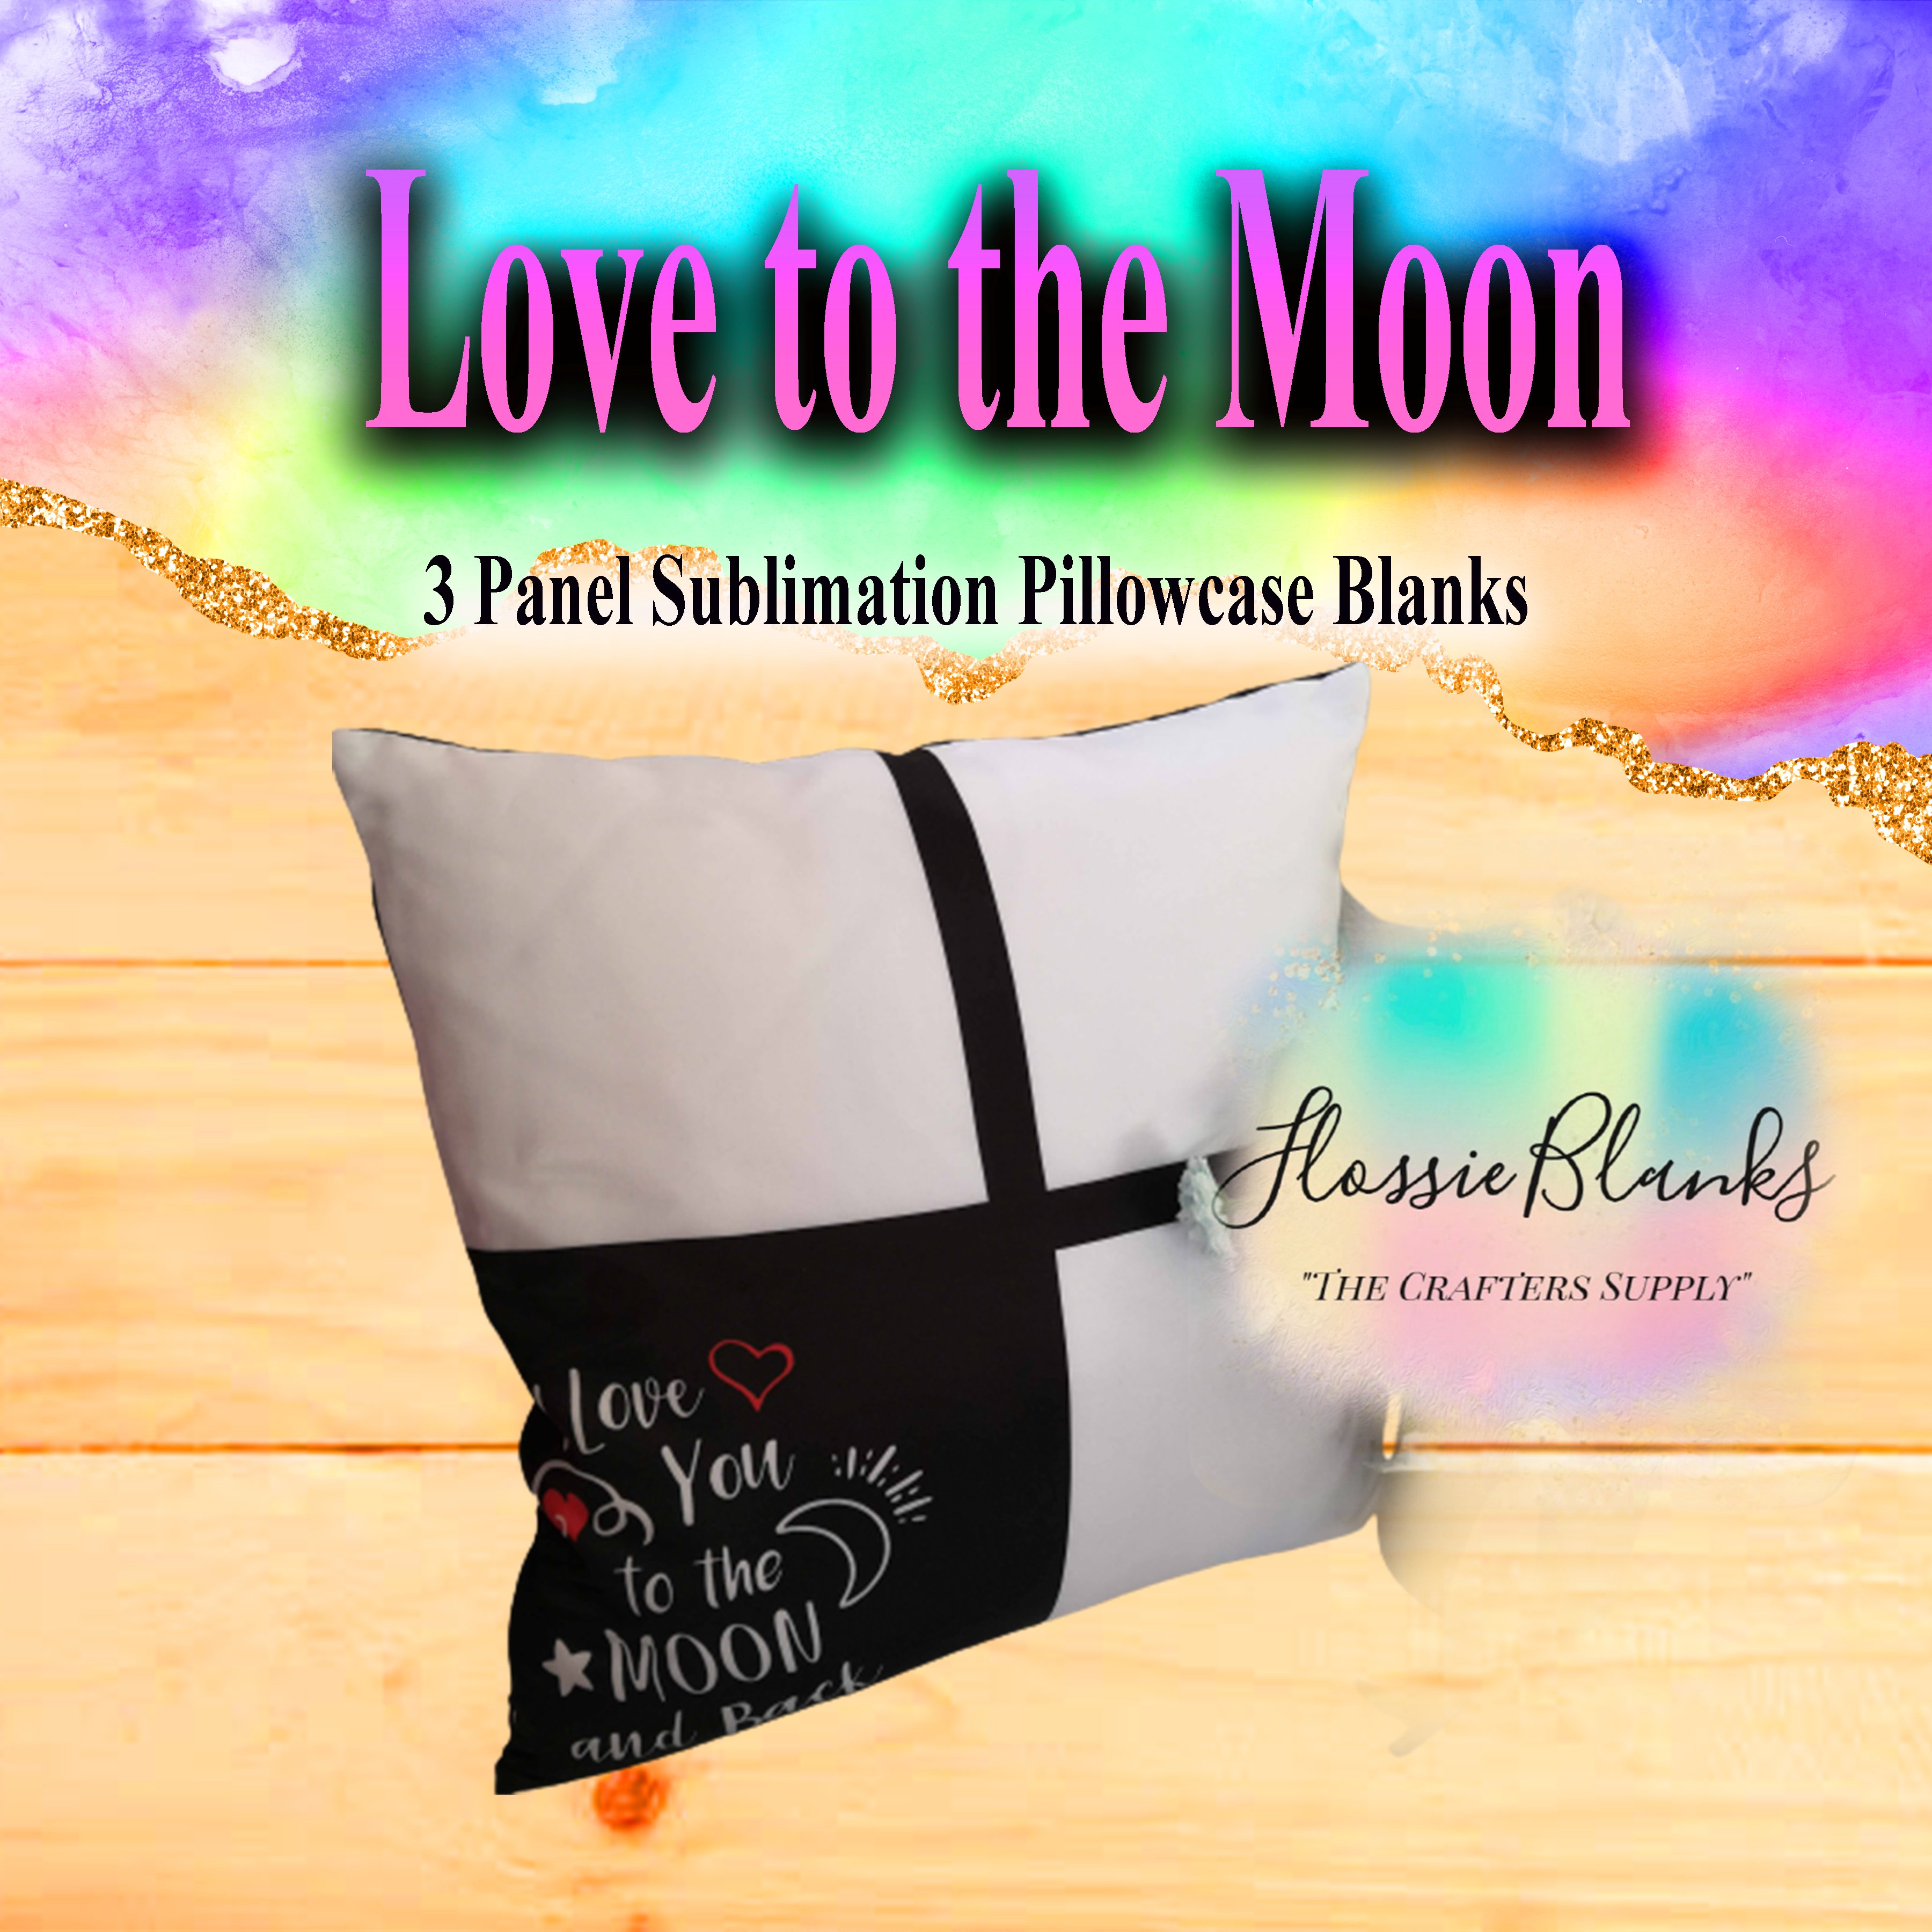 Pillowcase To the Moon Sublimation 3 Photo Panel (Blank)